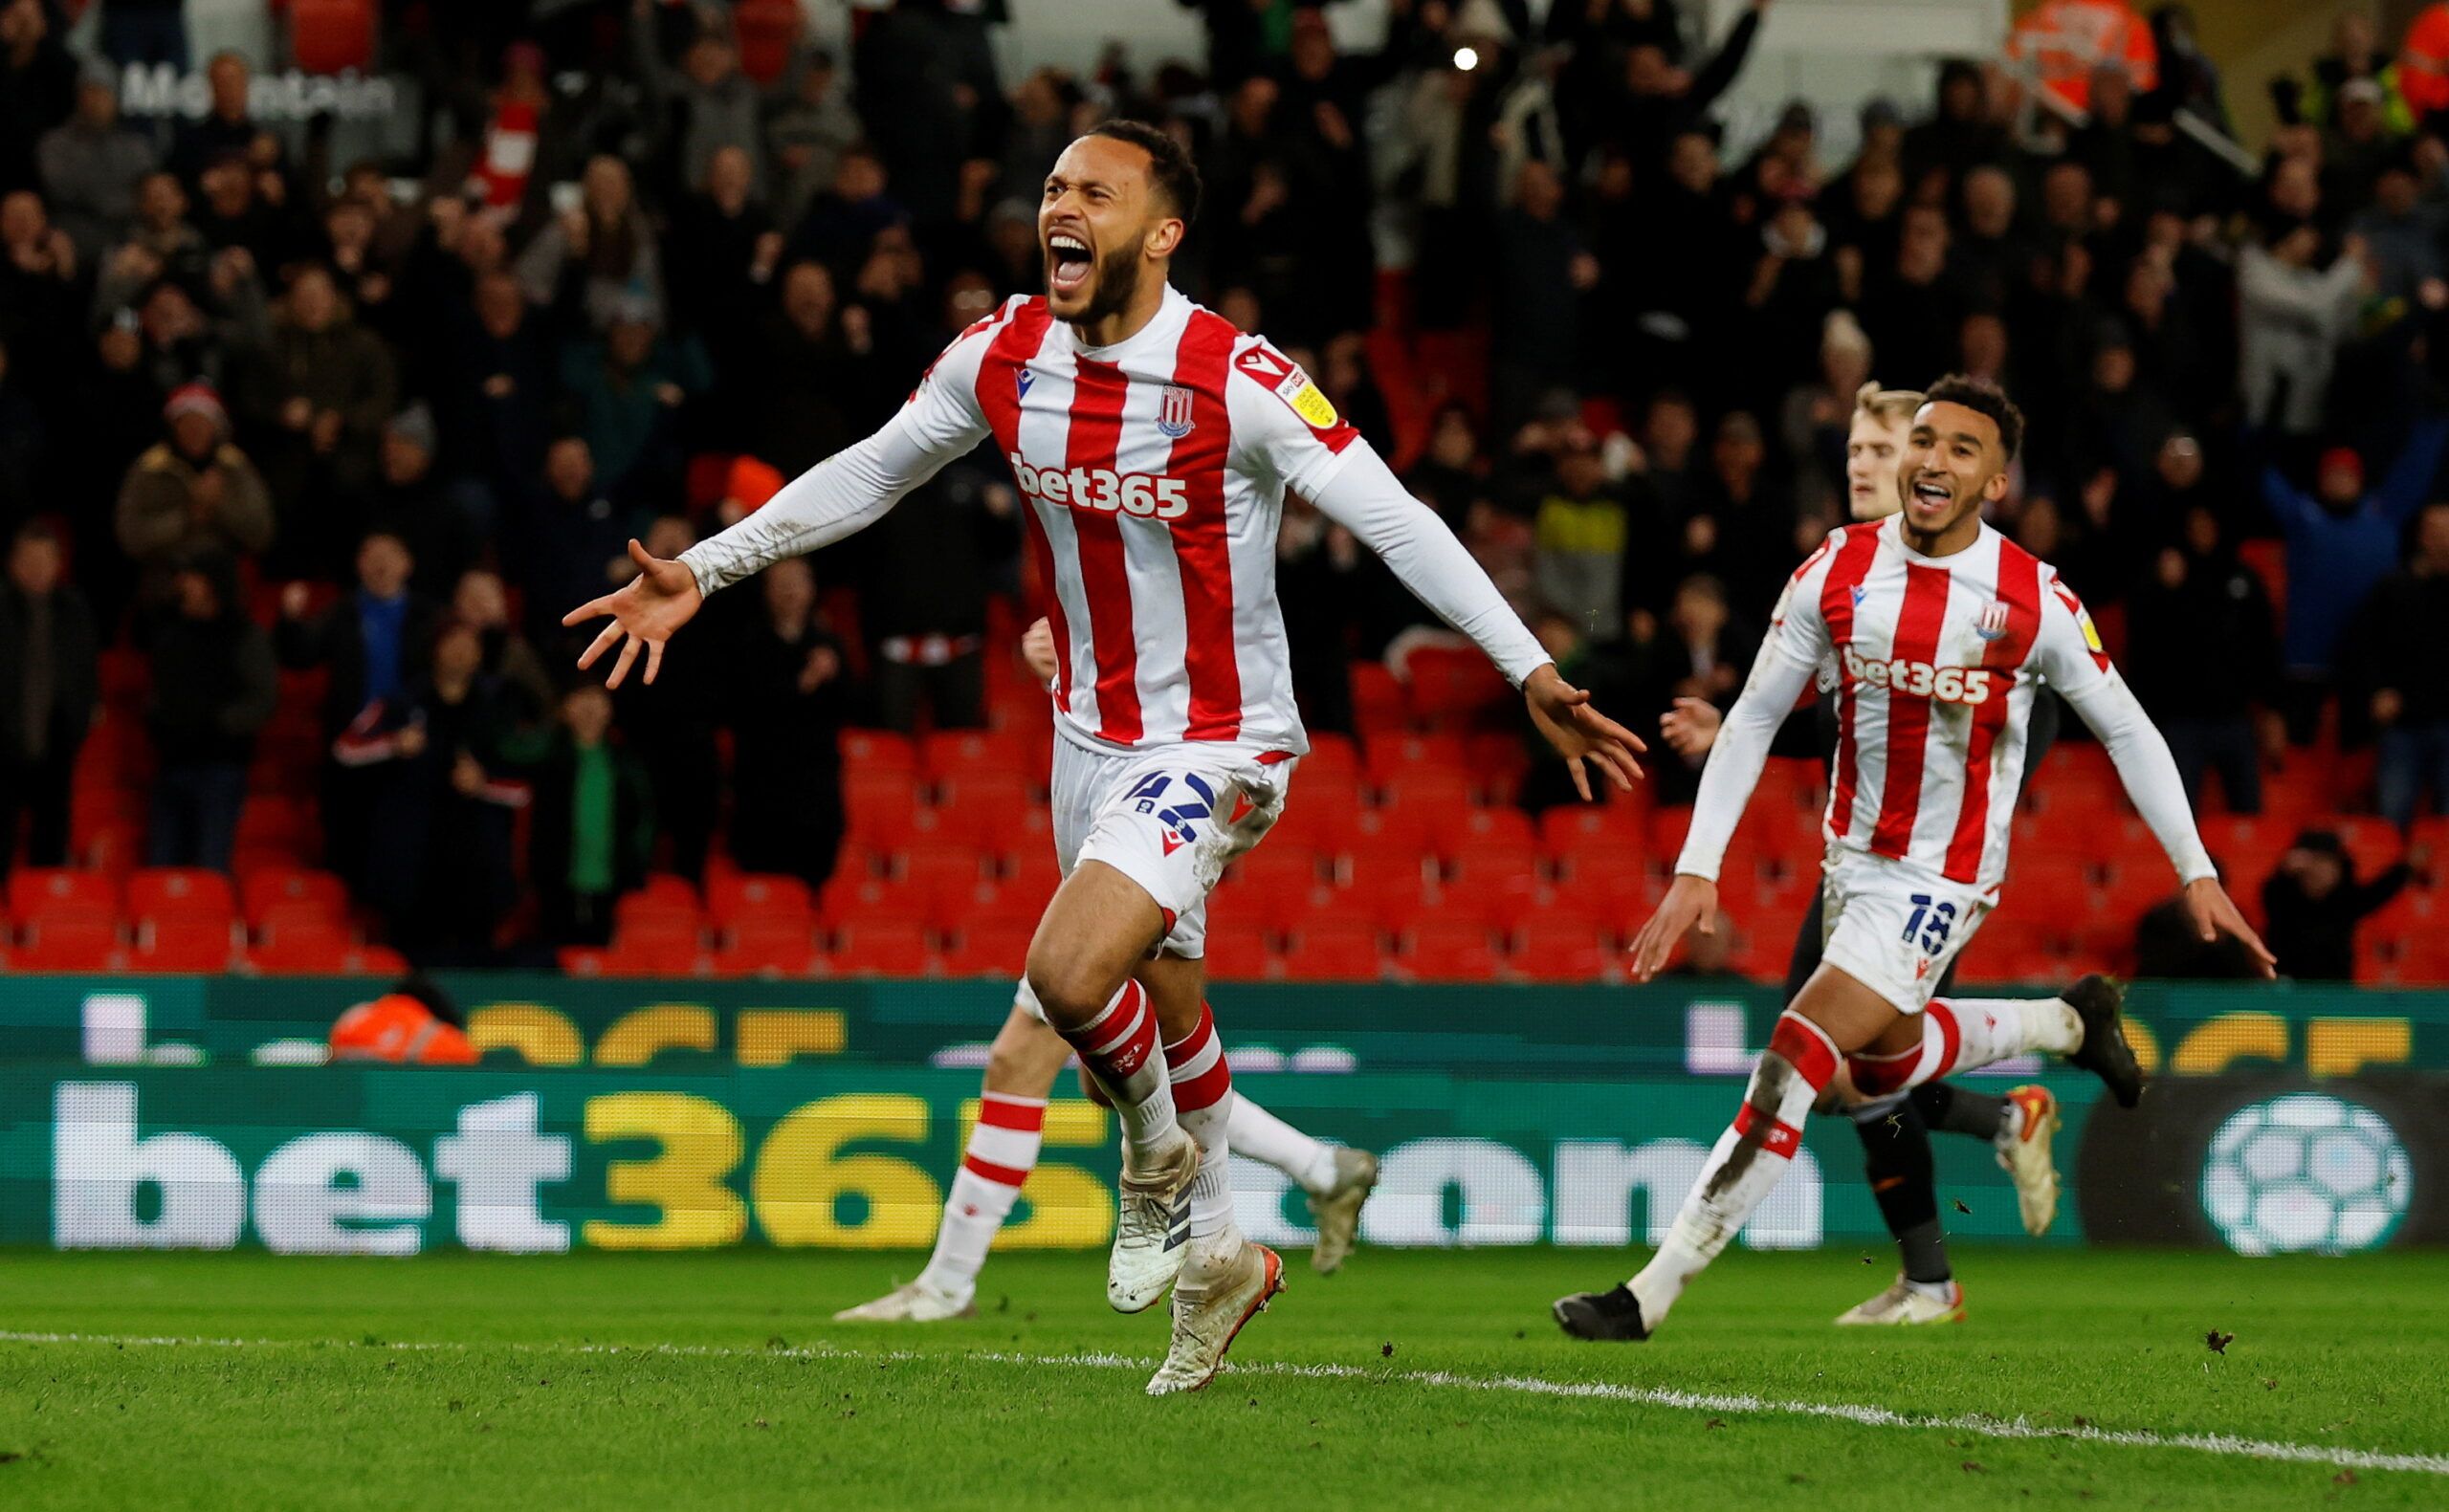 Soccer Football - Championship - Stoke City v Swansea City - bet365 Stadium, Stoke-on-Trent, Britain - February 8, 2022  Stoke City's Lewis Baker celebrates scoring their second goal  Action Images/Jason Cairnduff  EDITORIAL USE ONLY. No use with unauthorized audio, video, data, fixture lists, club/league logos or 